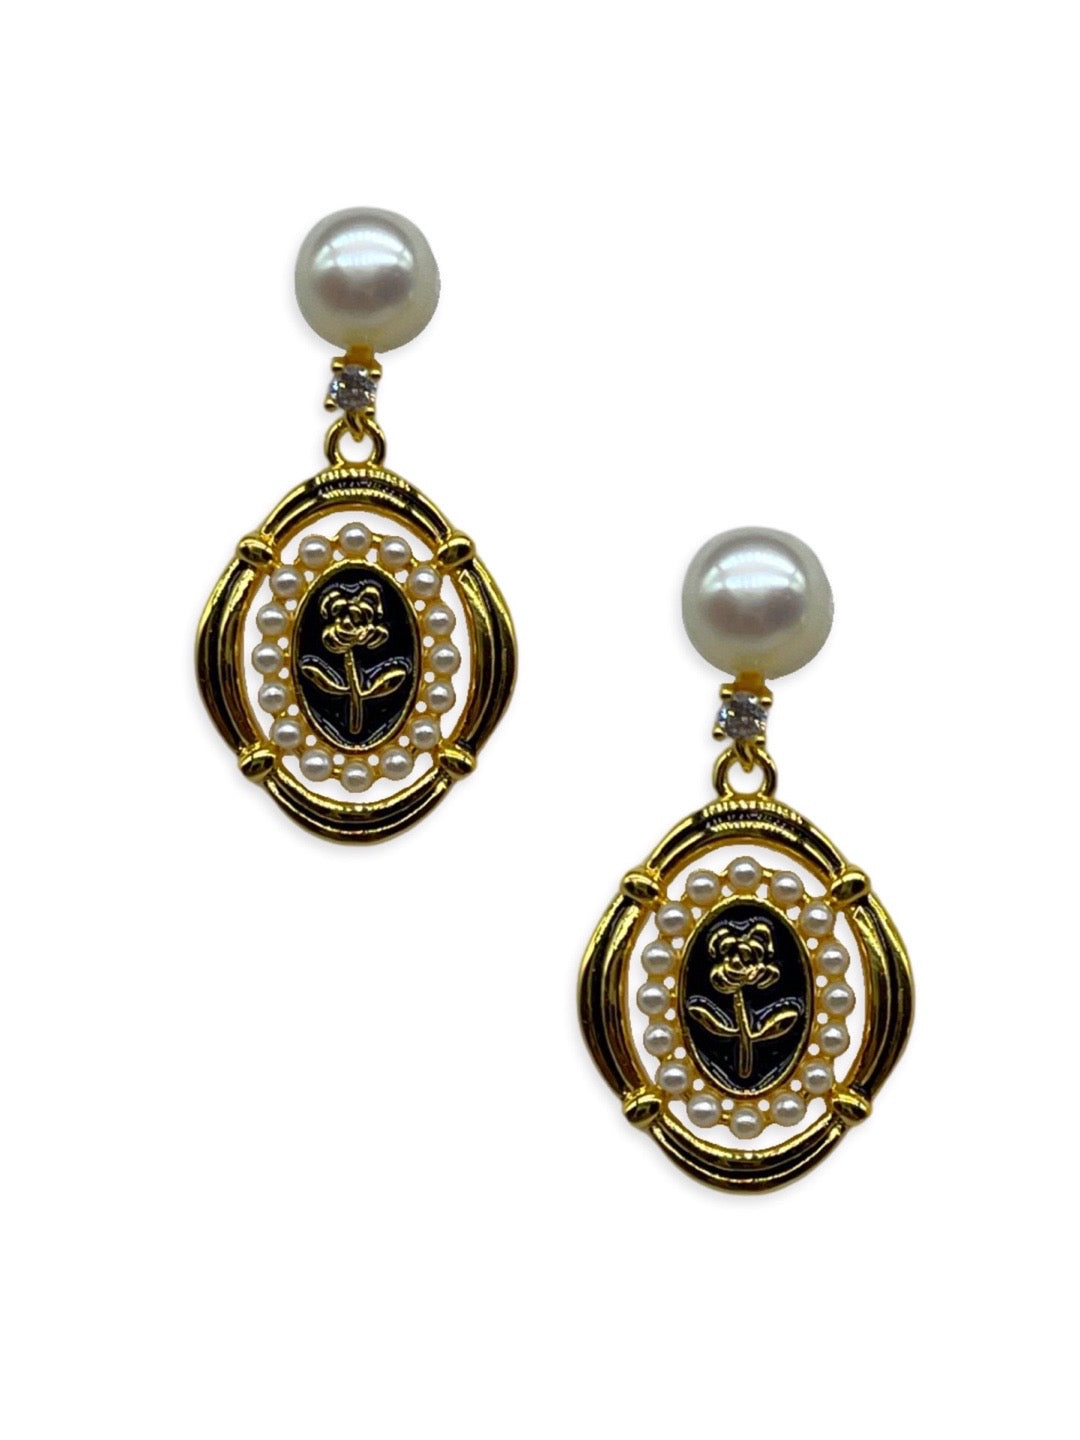 Fresh water pearl Earring With Floral Design Surrounded With Pearls